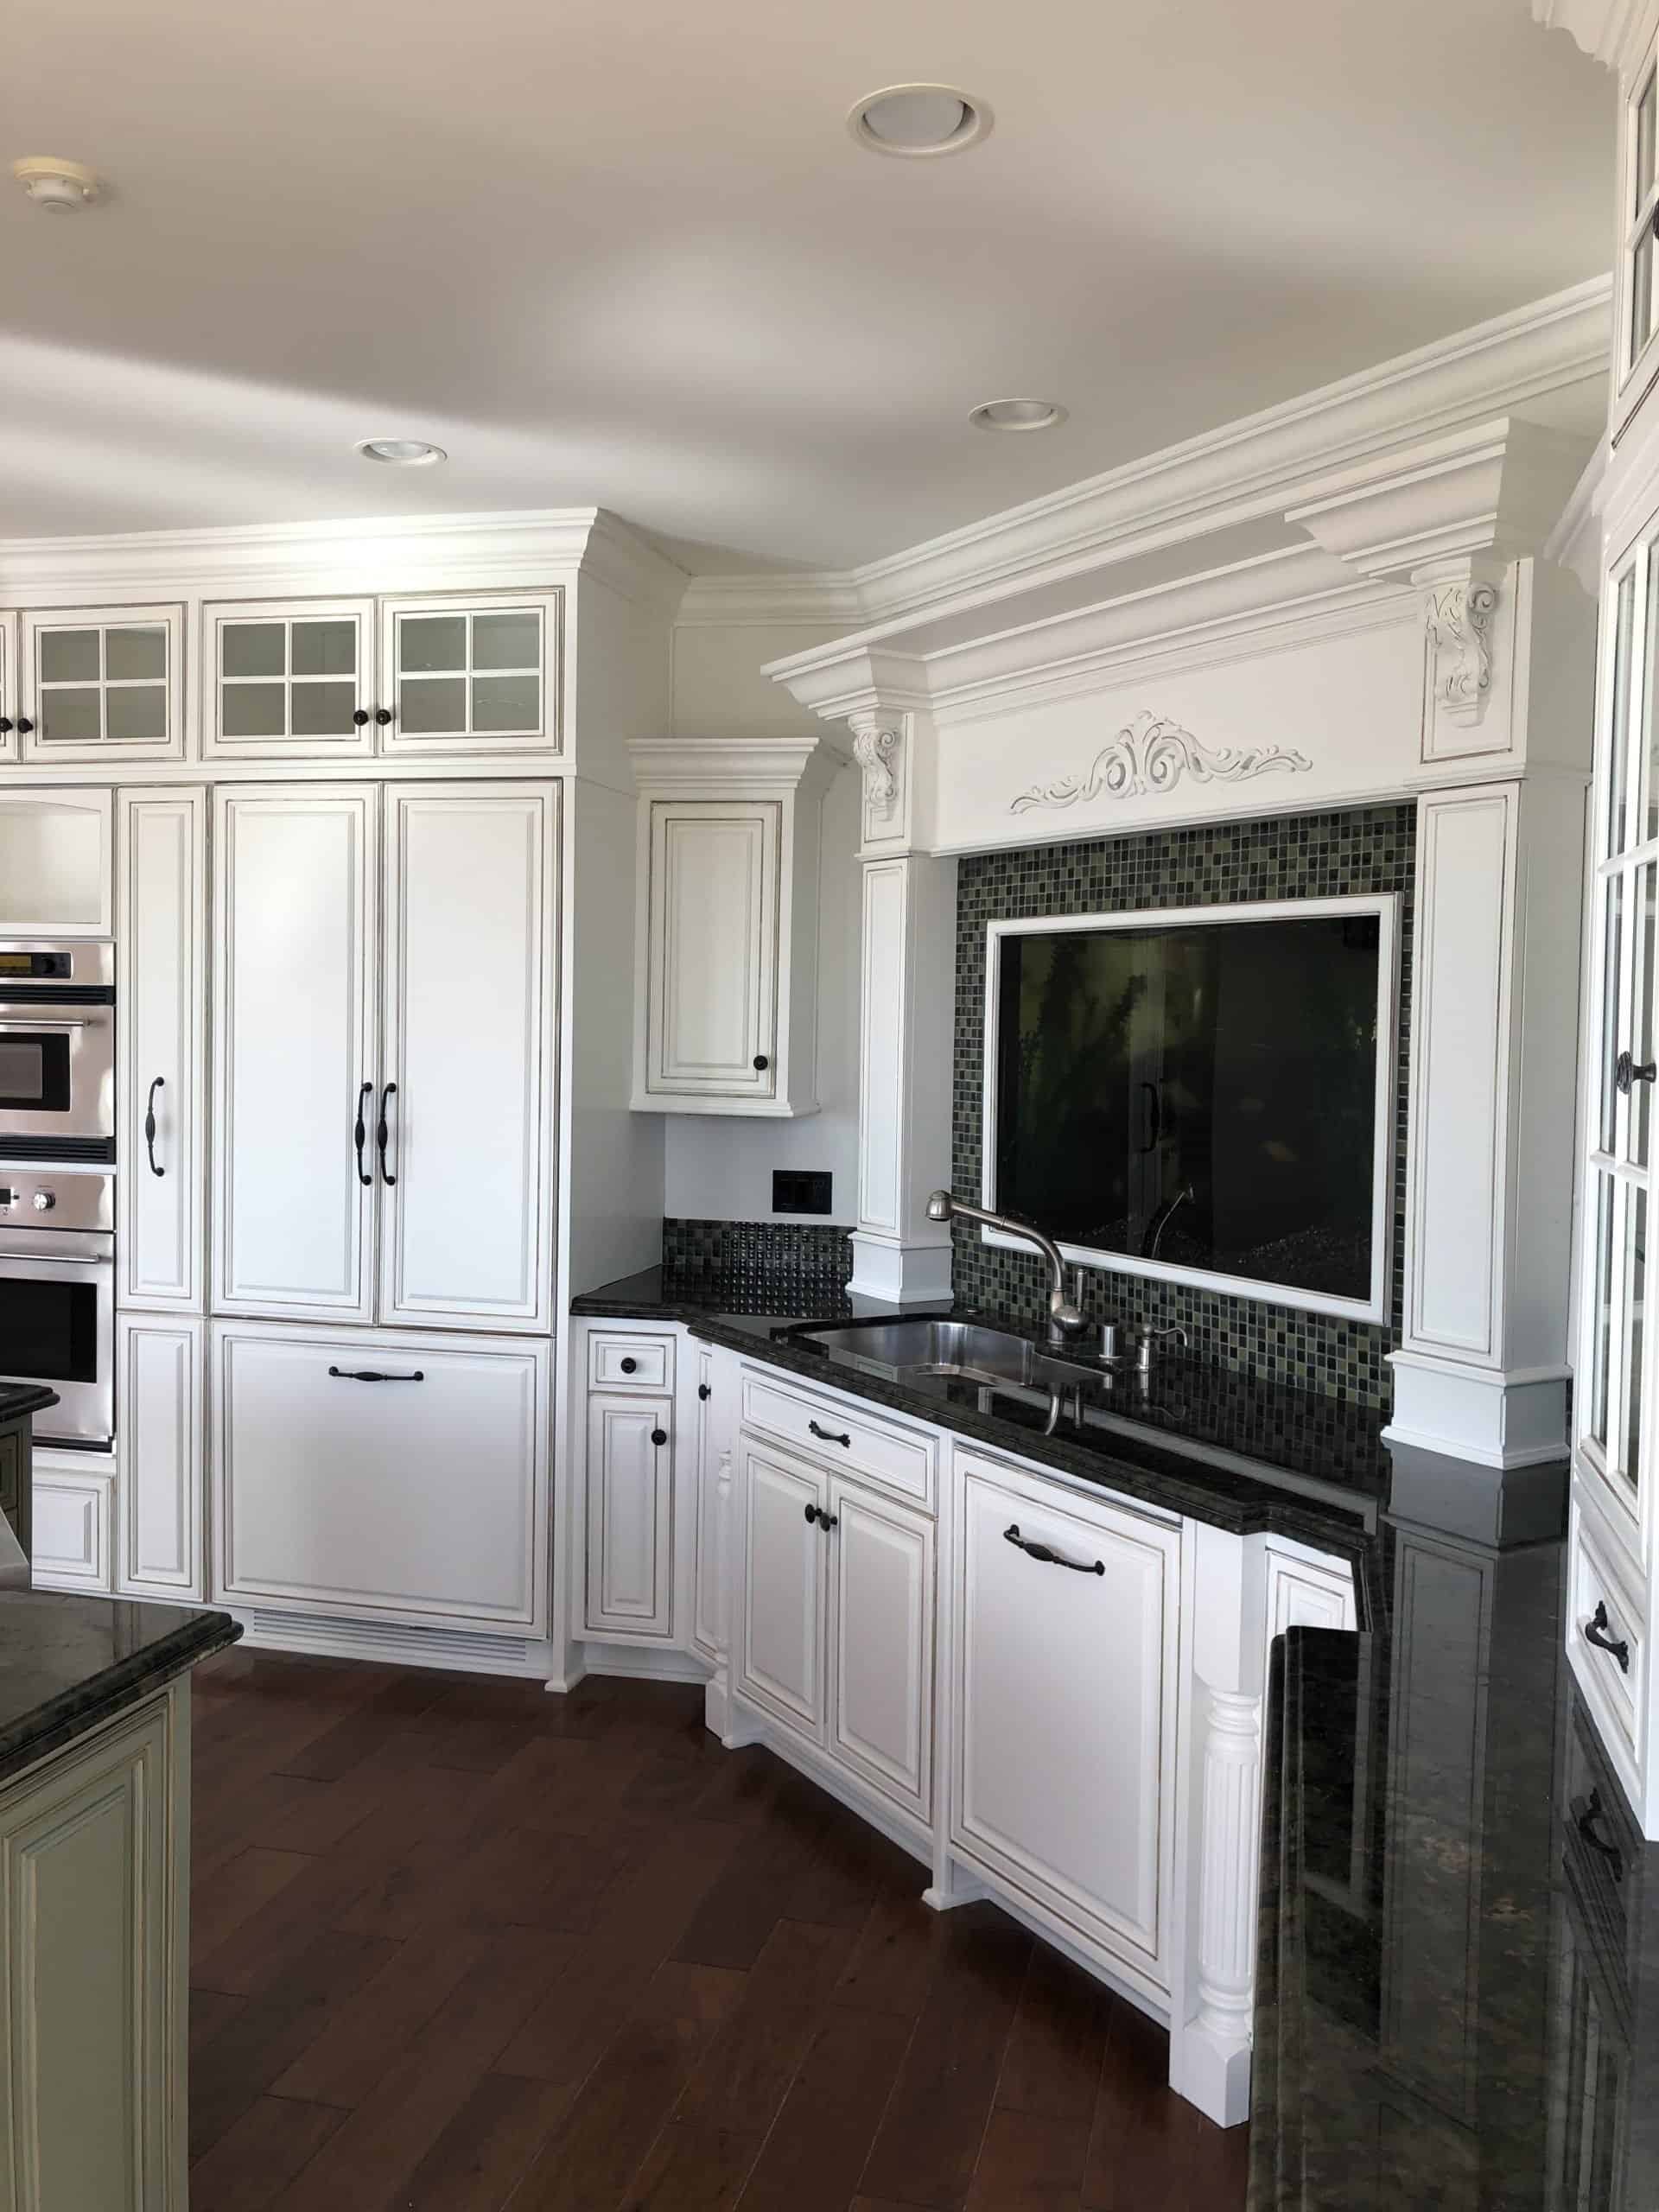 Procoat provides the most cost-effective alternative to new cabinets with cabinet refinishing. Expert cabinet refinishers upgrade to like new. for less